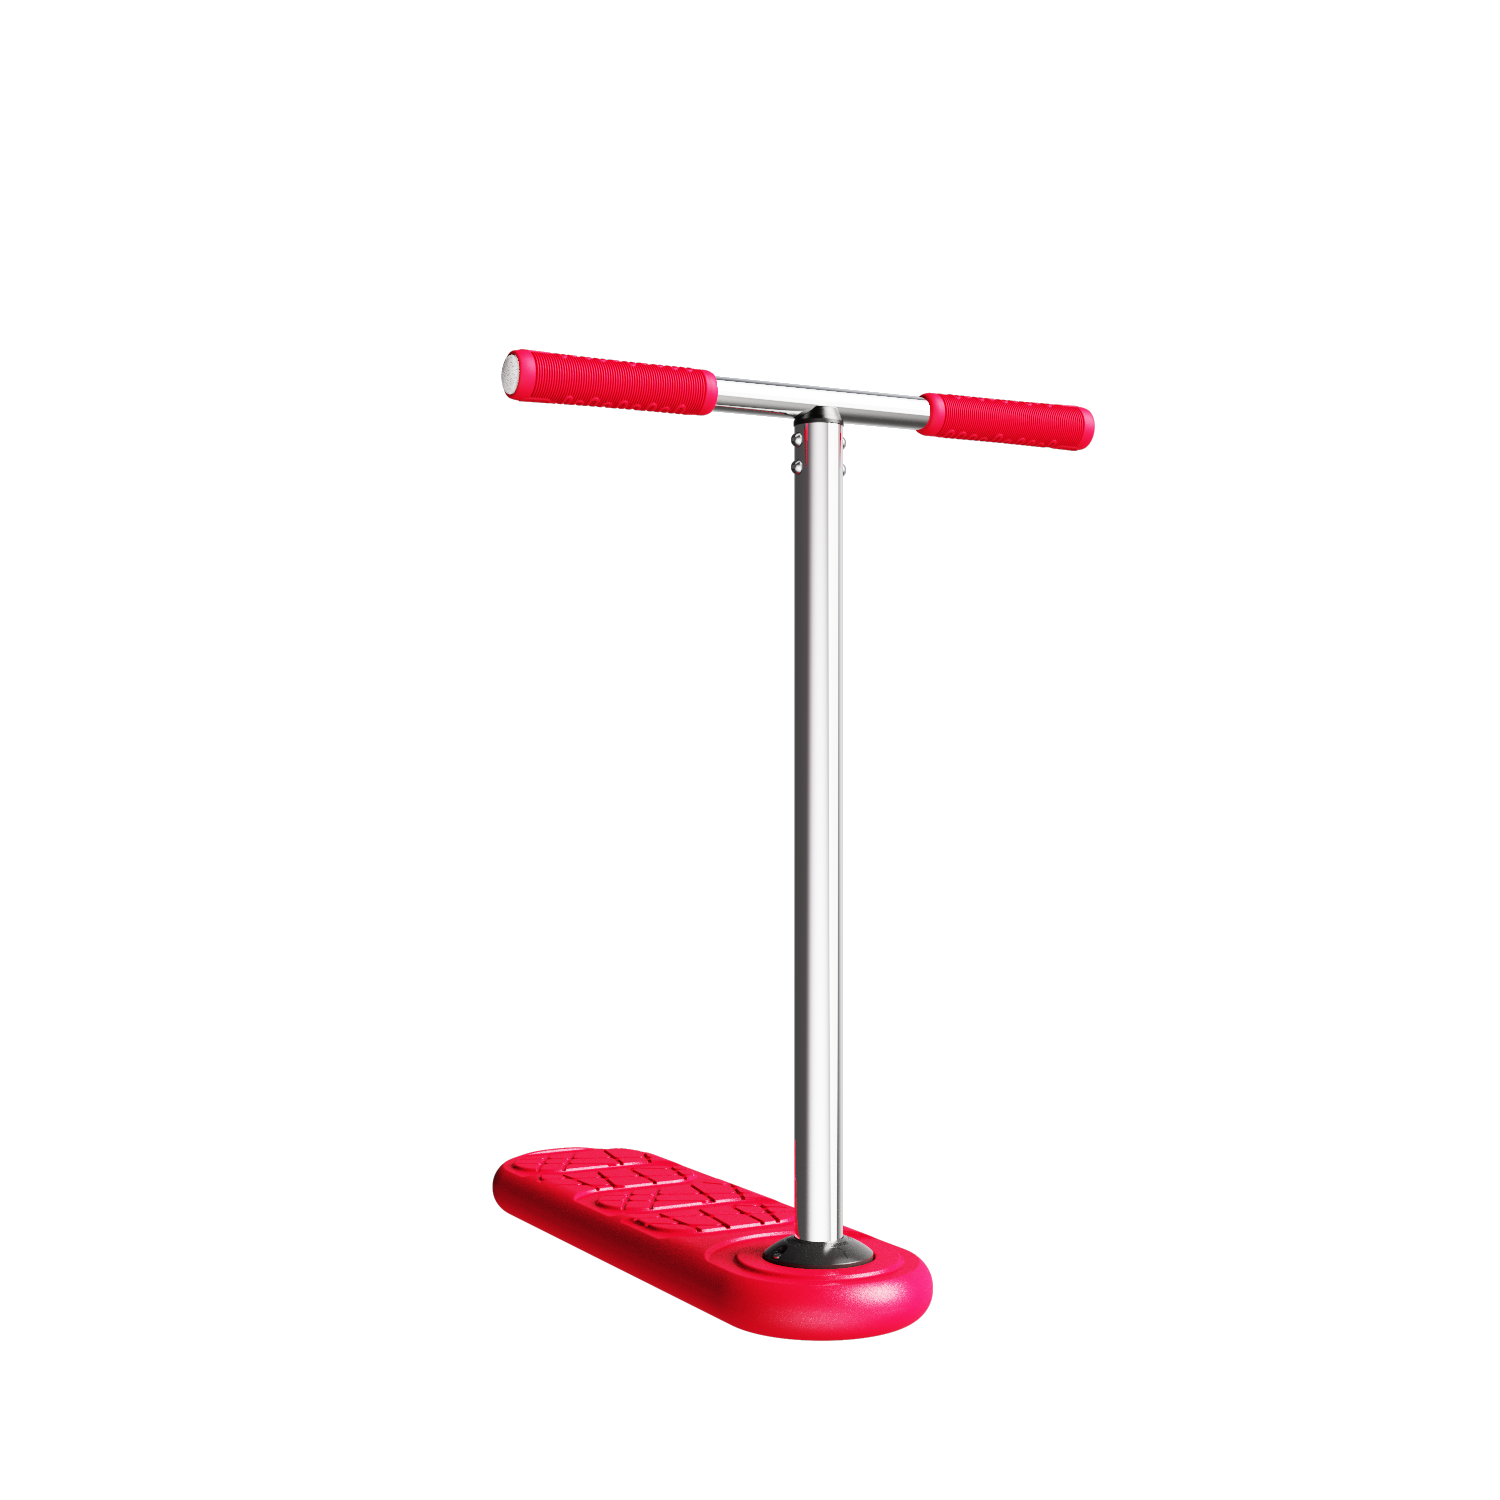 Rocker Trampoline - INDO Scooter – The Trick Scooter Shop